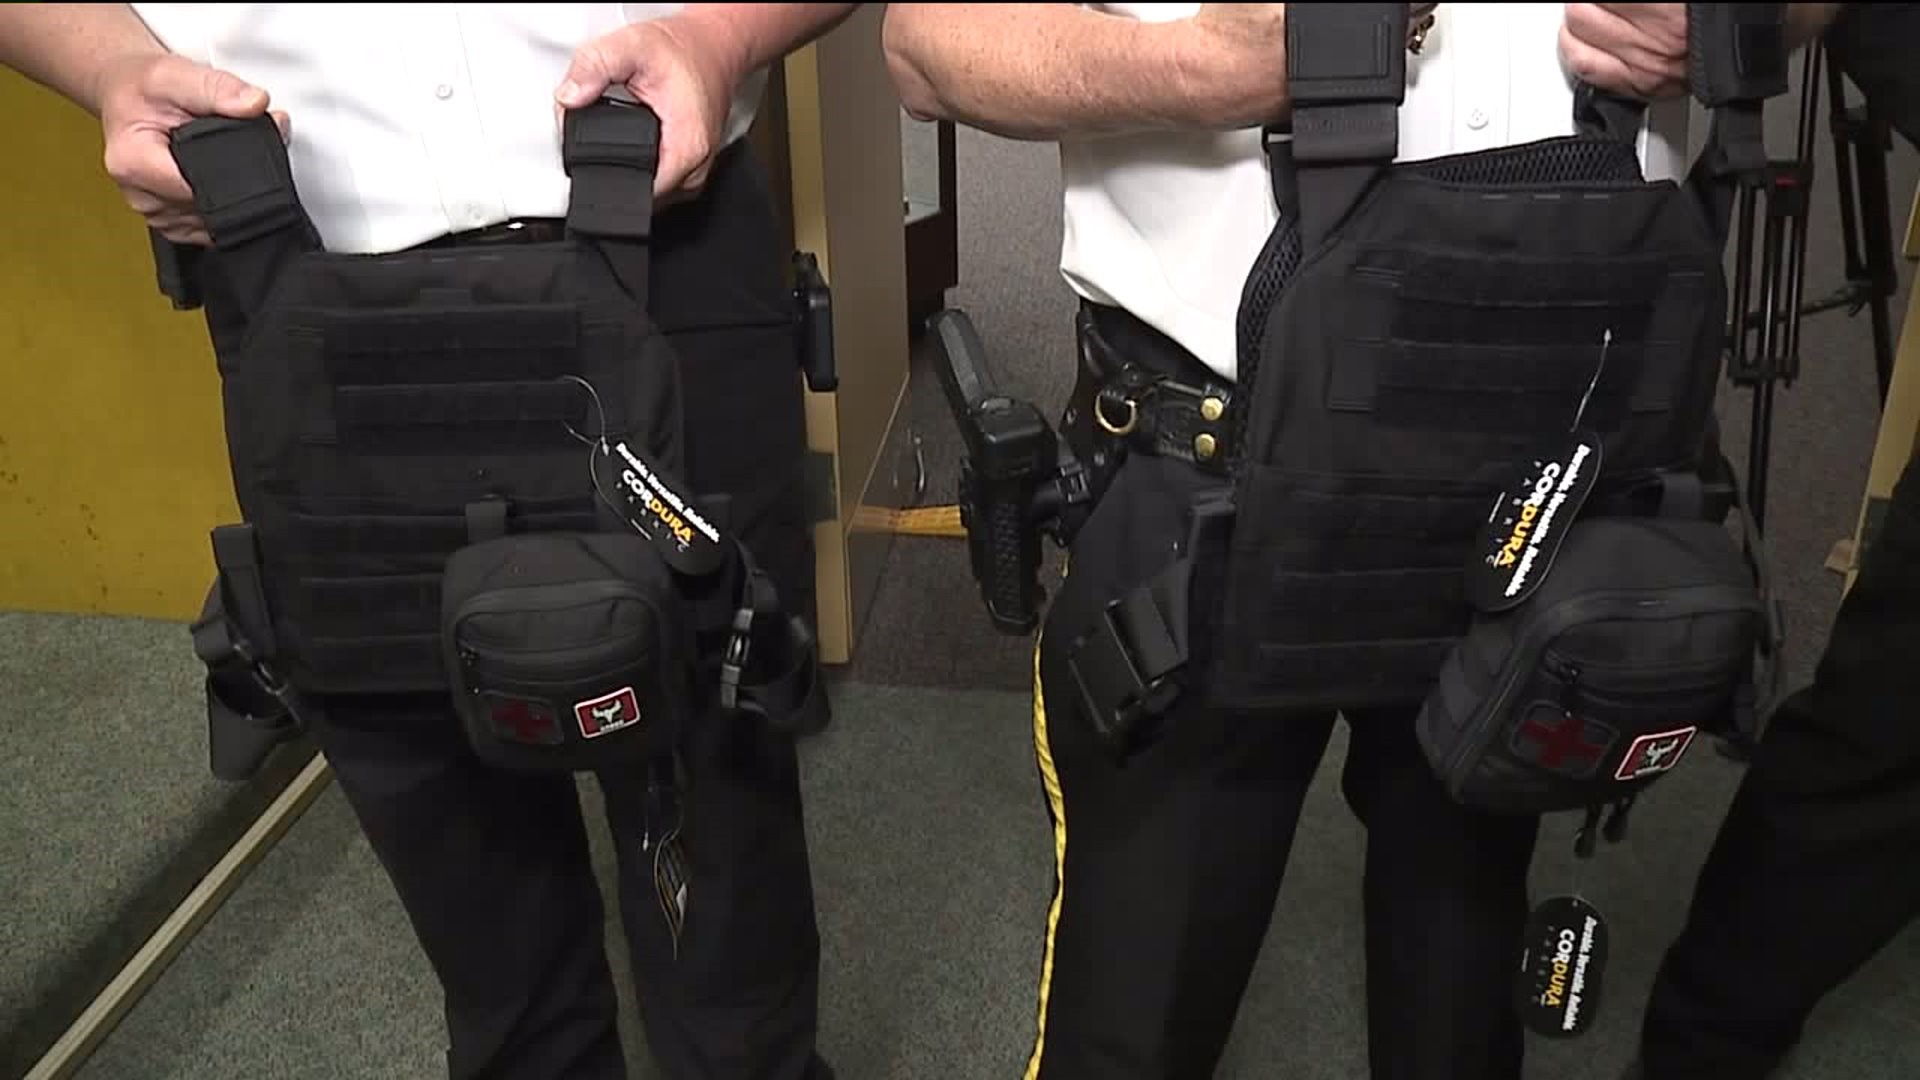 Police Departments in Luzerne County Receive Protective Vests